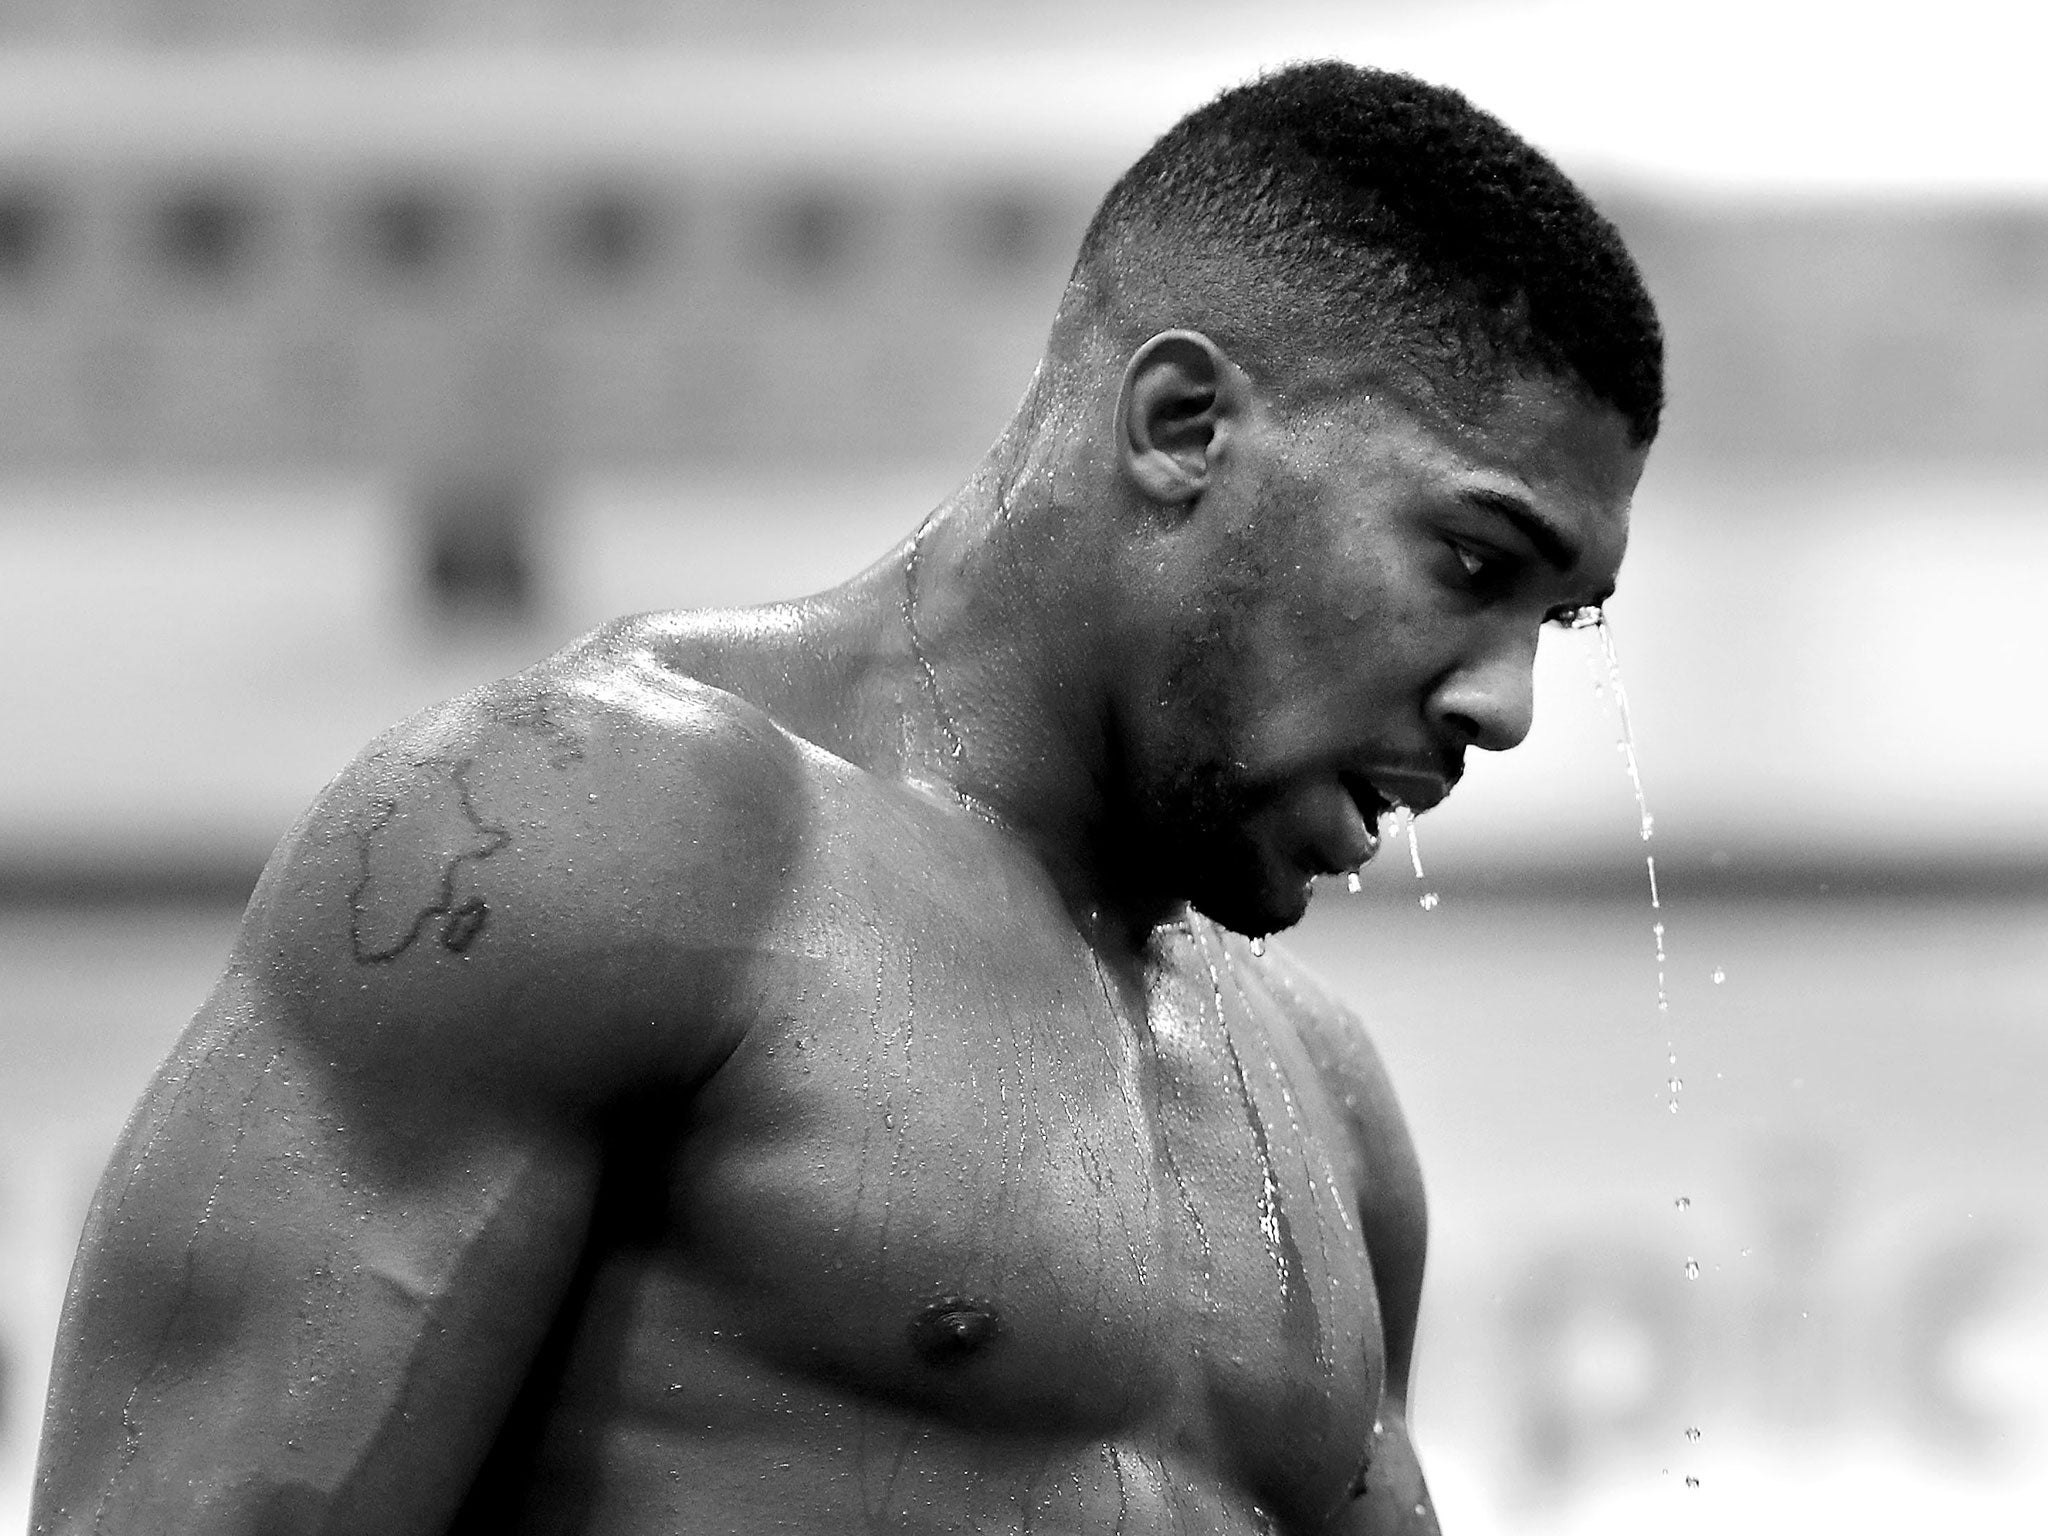 Anthony Joshua has the potential to carve out a lasting legacy